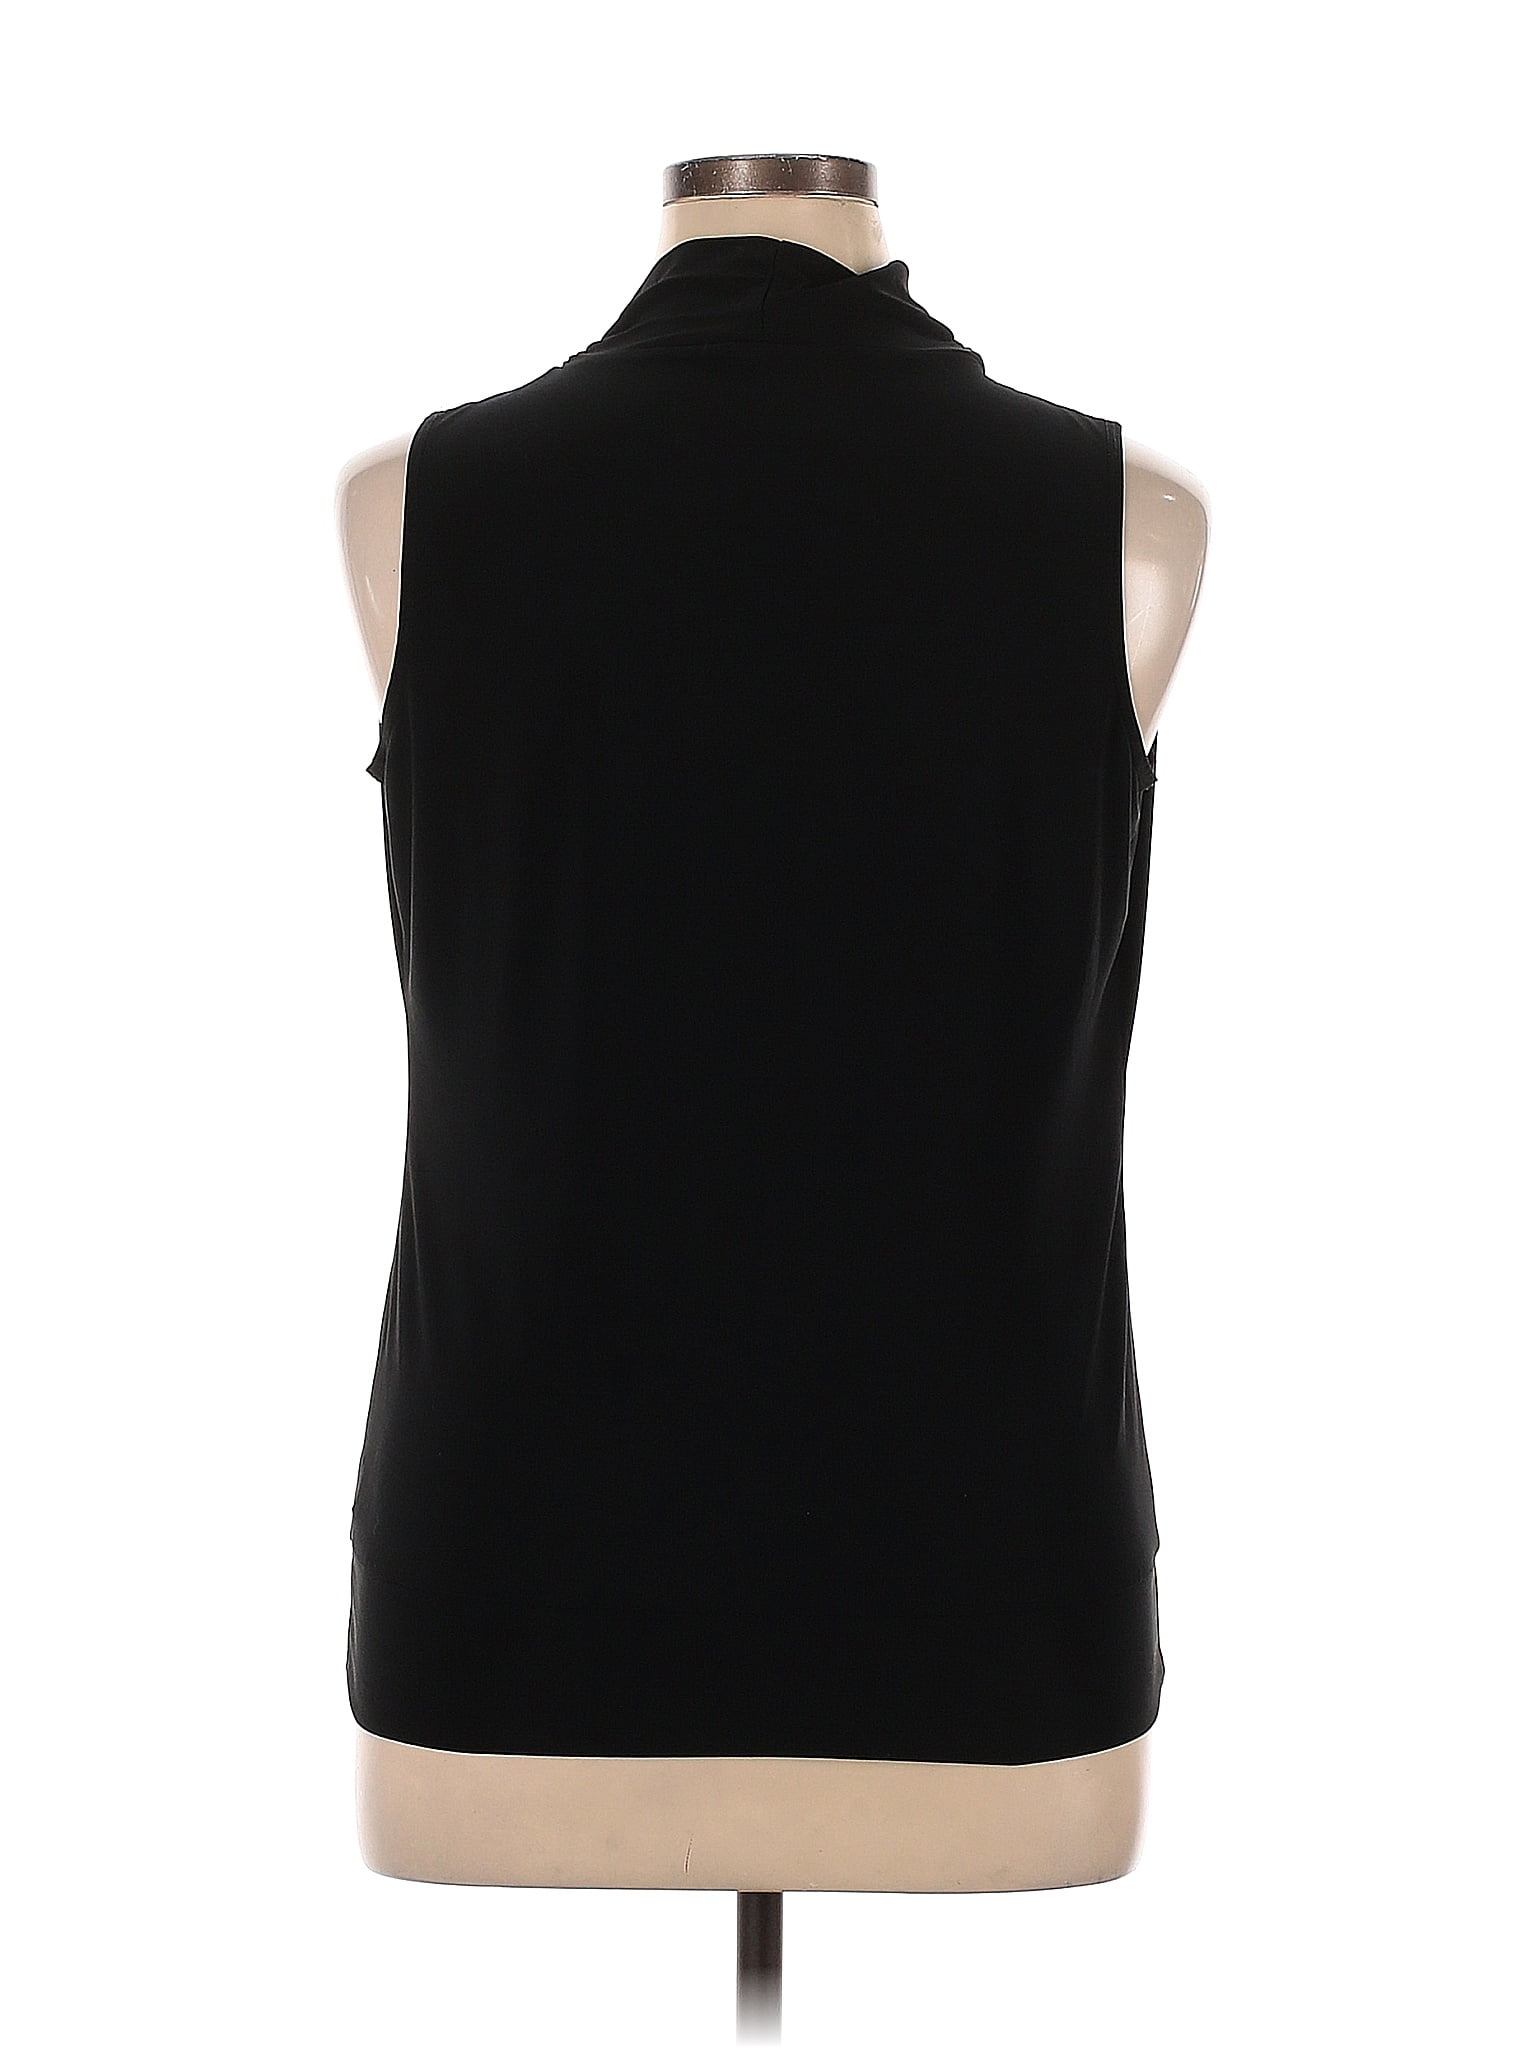 Perseption Concept Solid Black Sleeveless Turtleneck Size XL - 7% off